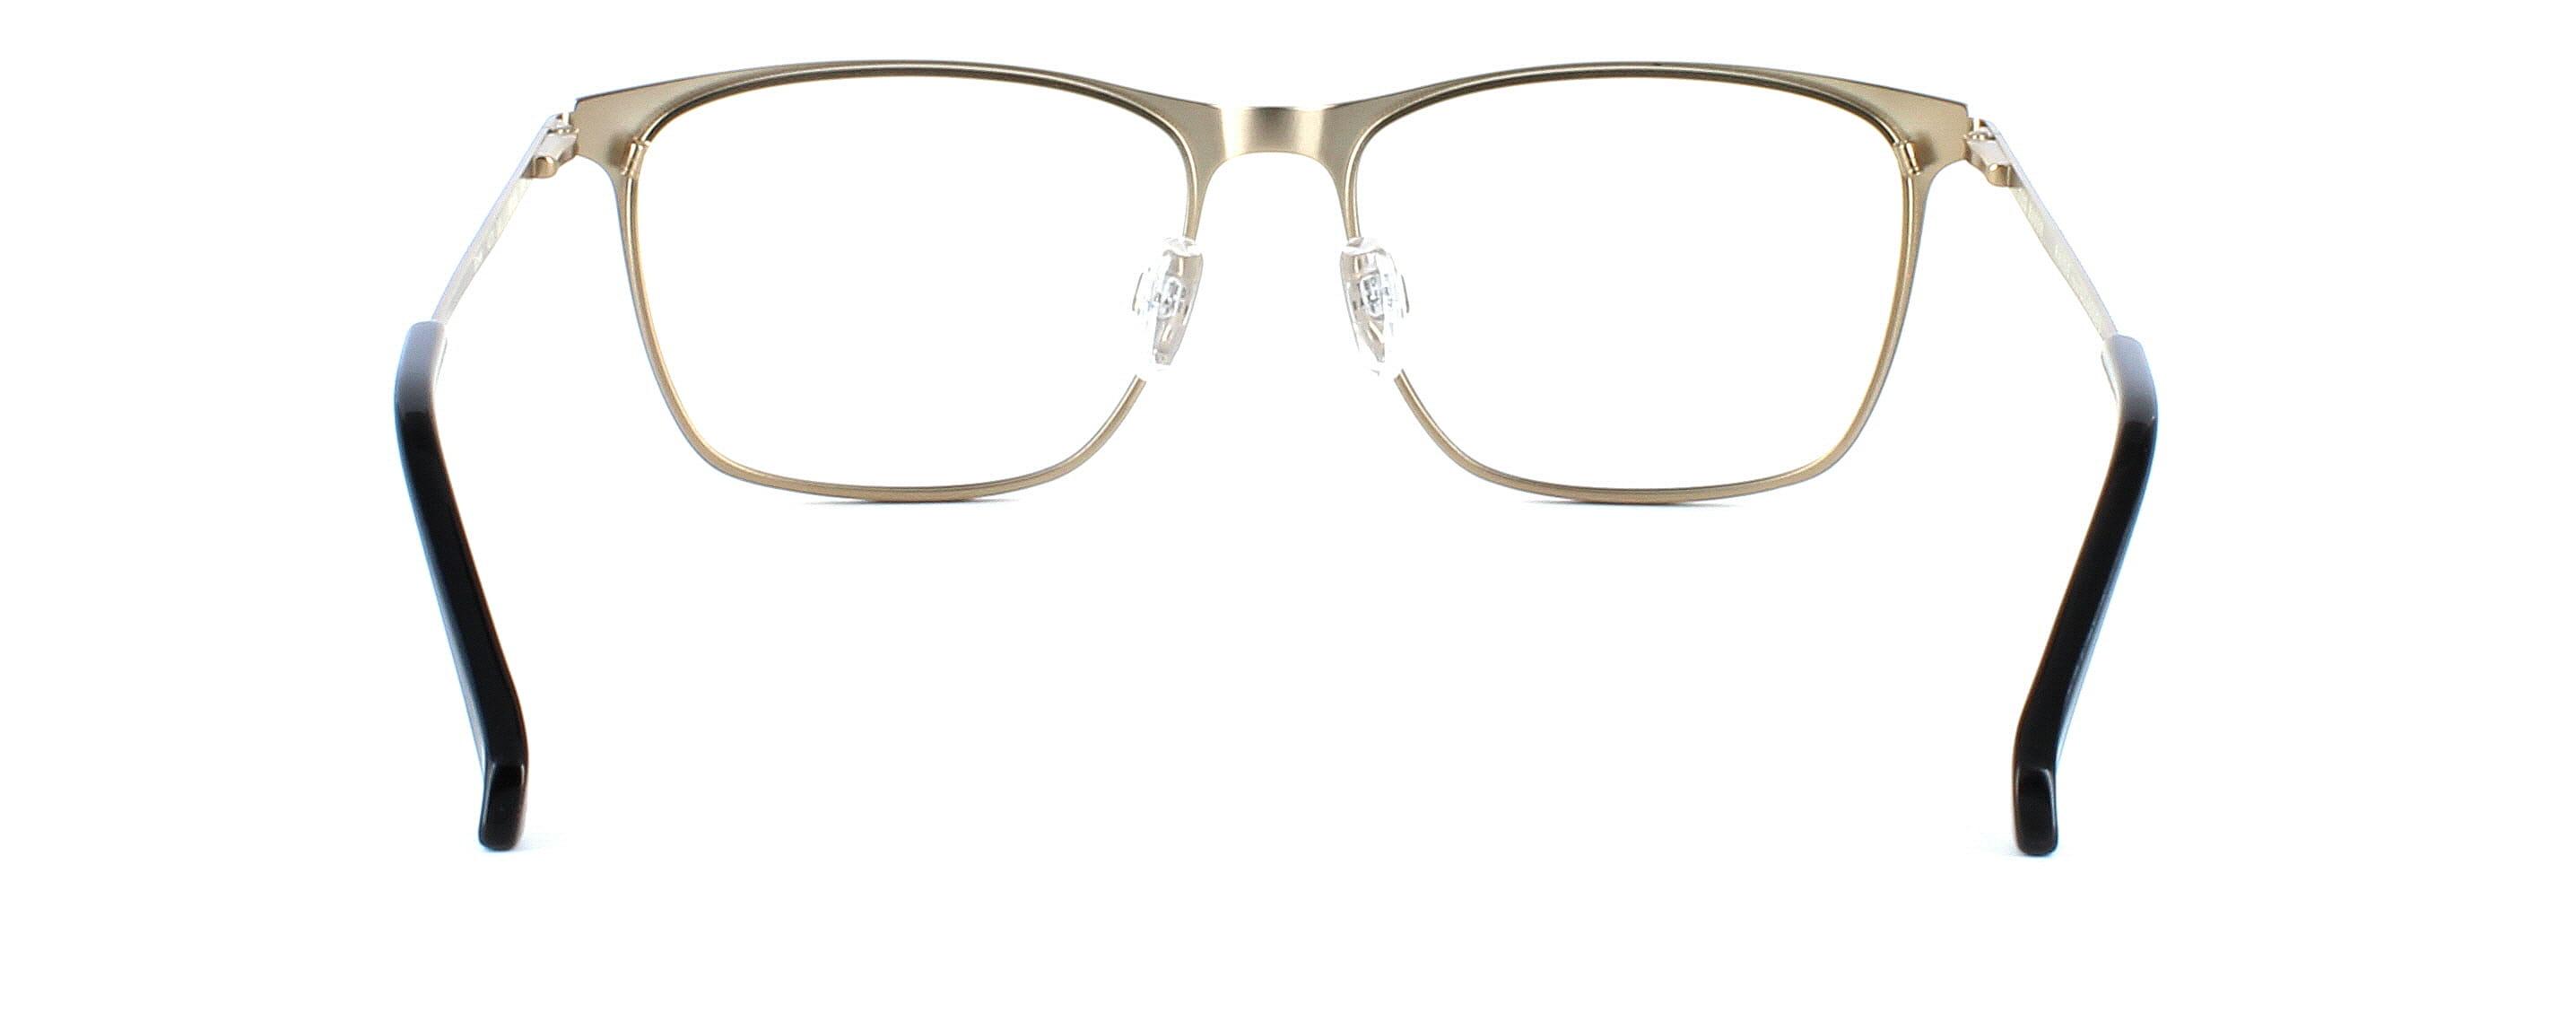 Ted Baker 4276 in black and gold. This is a metal unisex designer frame - image view 3